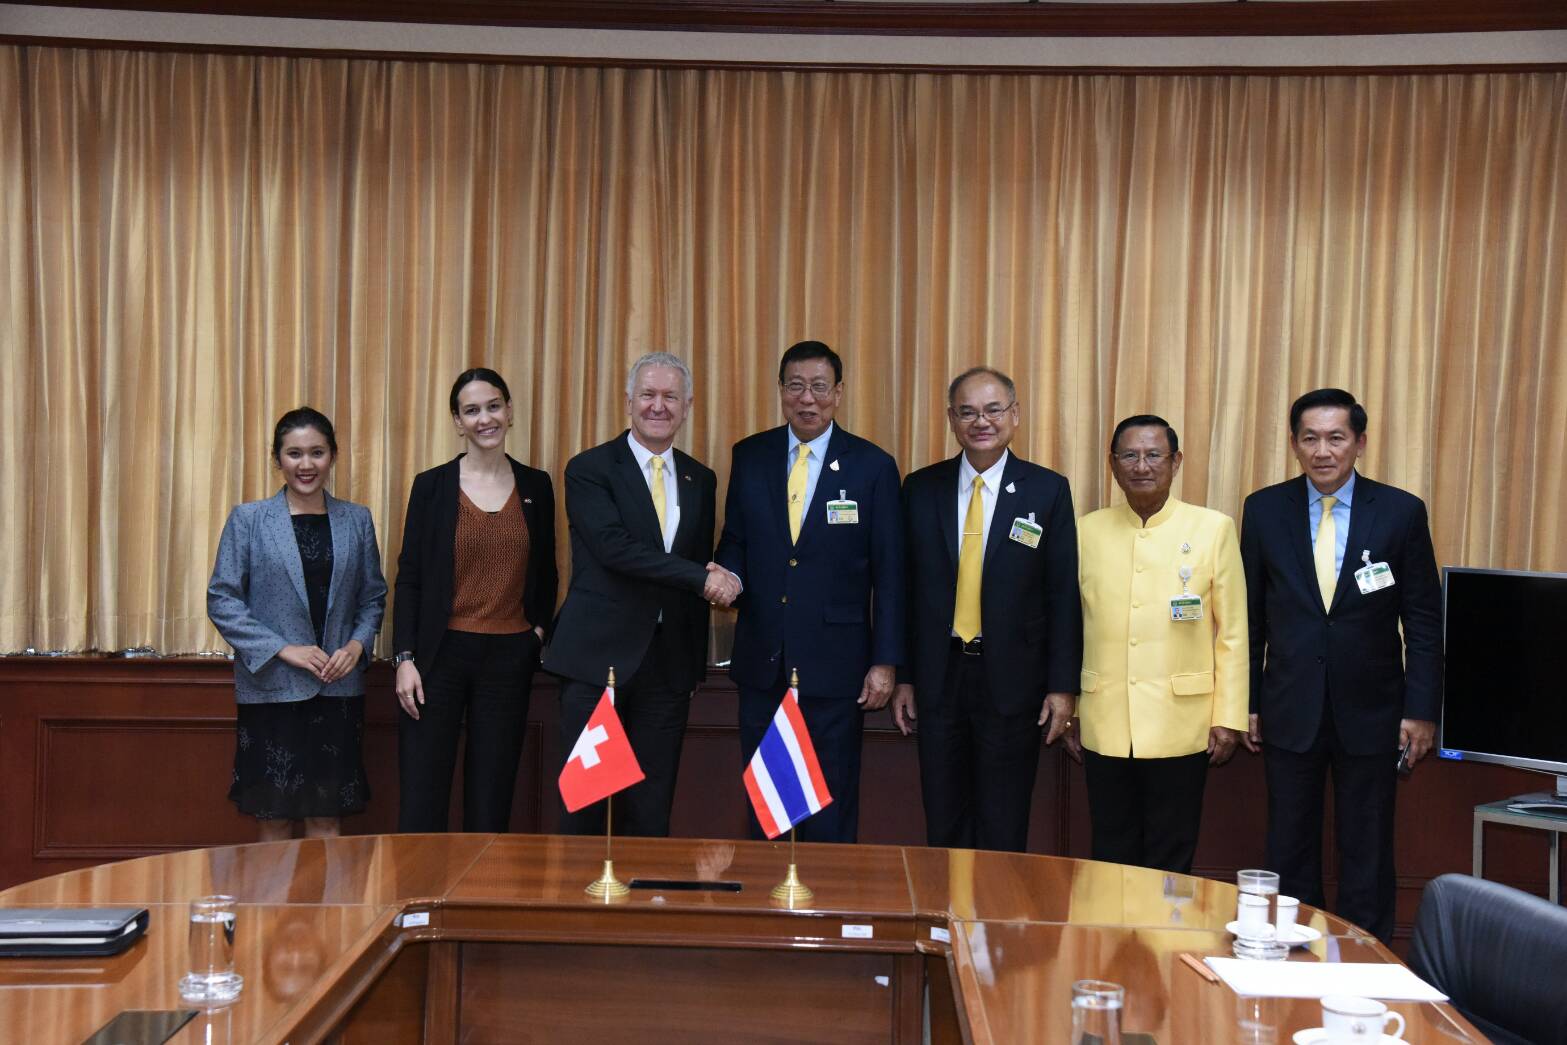 H.E. Mr. Ivo Sieber, Ambassador Extraordinary and Plenipotentiary of Swiss Confederation to Thailand, Paid a Courtesy Call to the President of the Senate upon the Completion of his Term (26 July 2019)